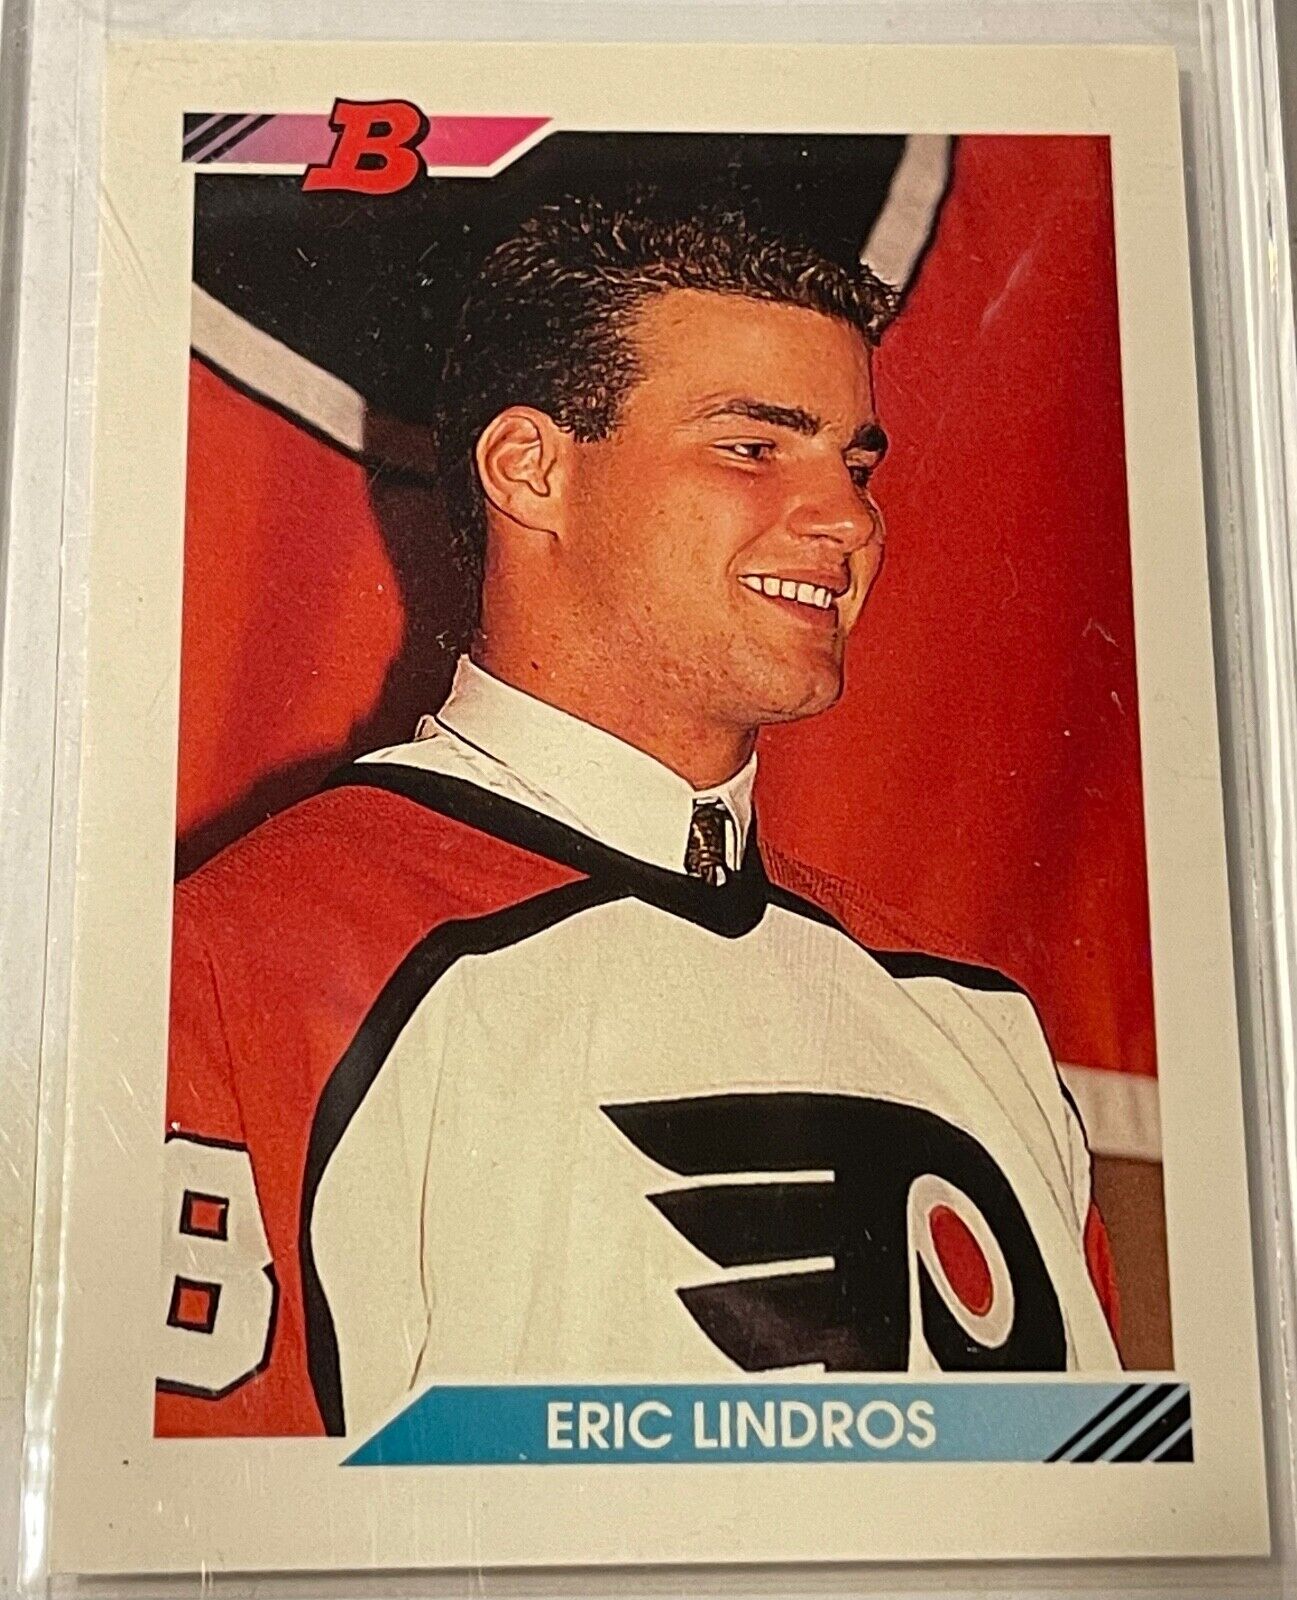 1992-93 Bowman ERIC LINDROS Rookie Card RC Philadelphia Flyers #442, HOF. rookie card picture